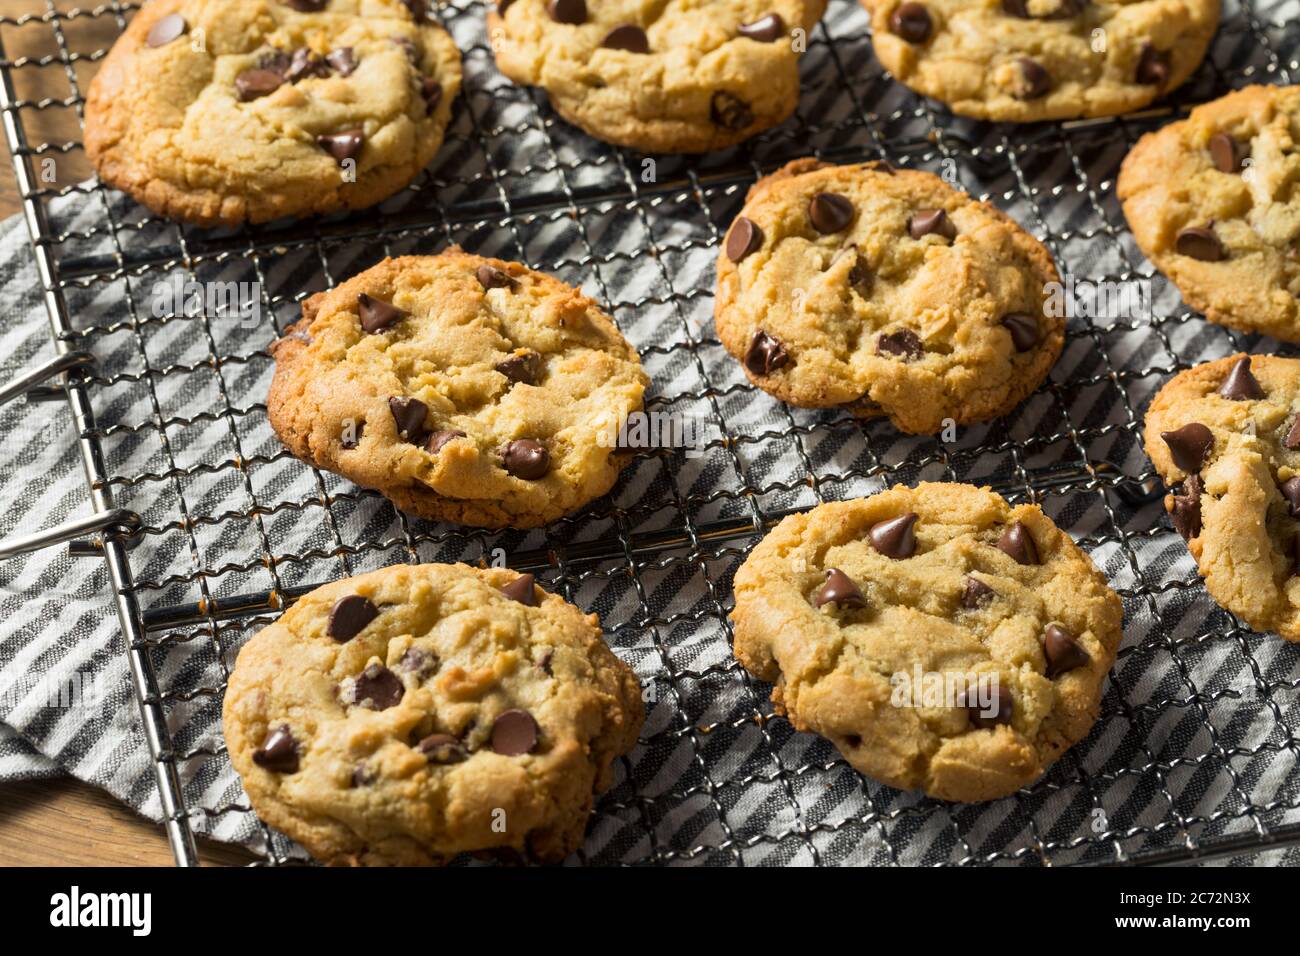 Homemade Warm Chocolate Chip Cookies Ready to Eat Stock Photo